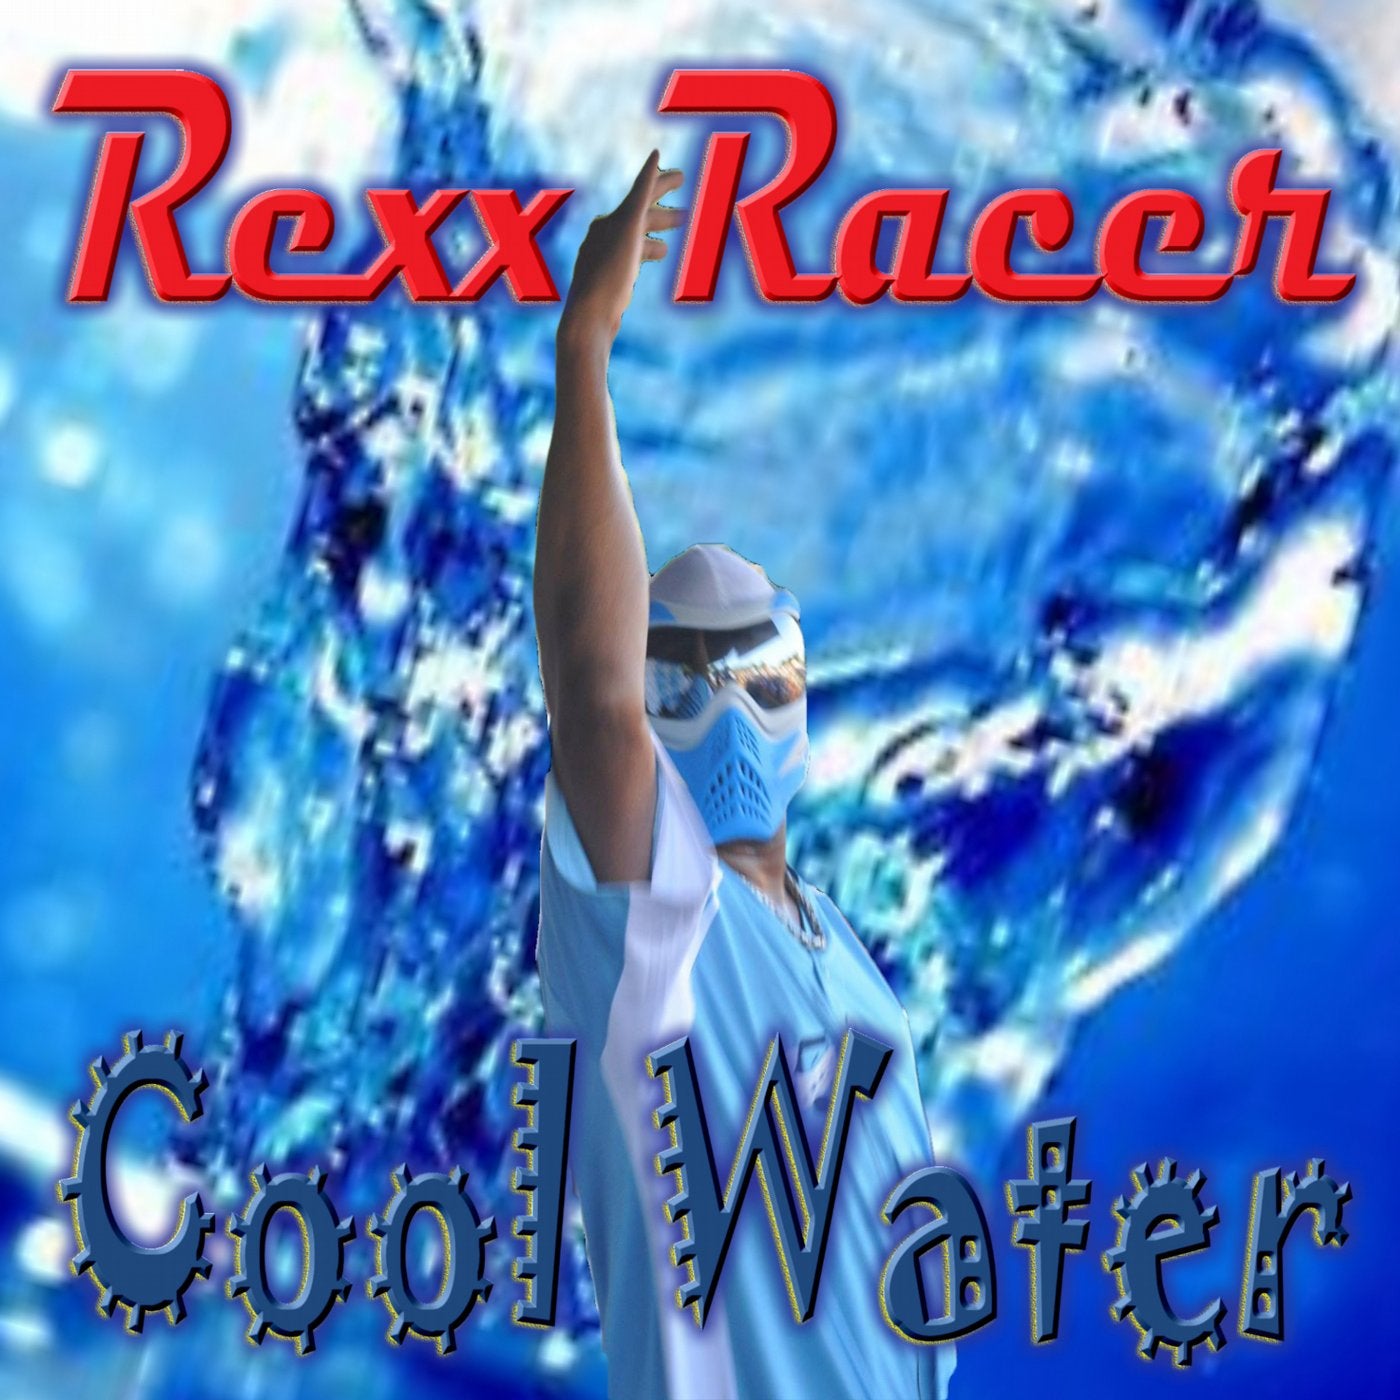 Cool Water